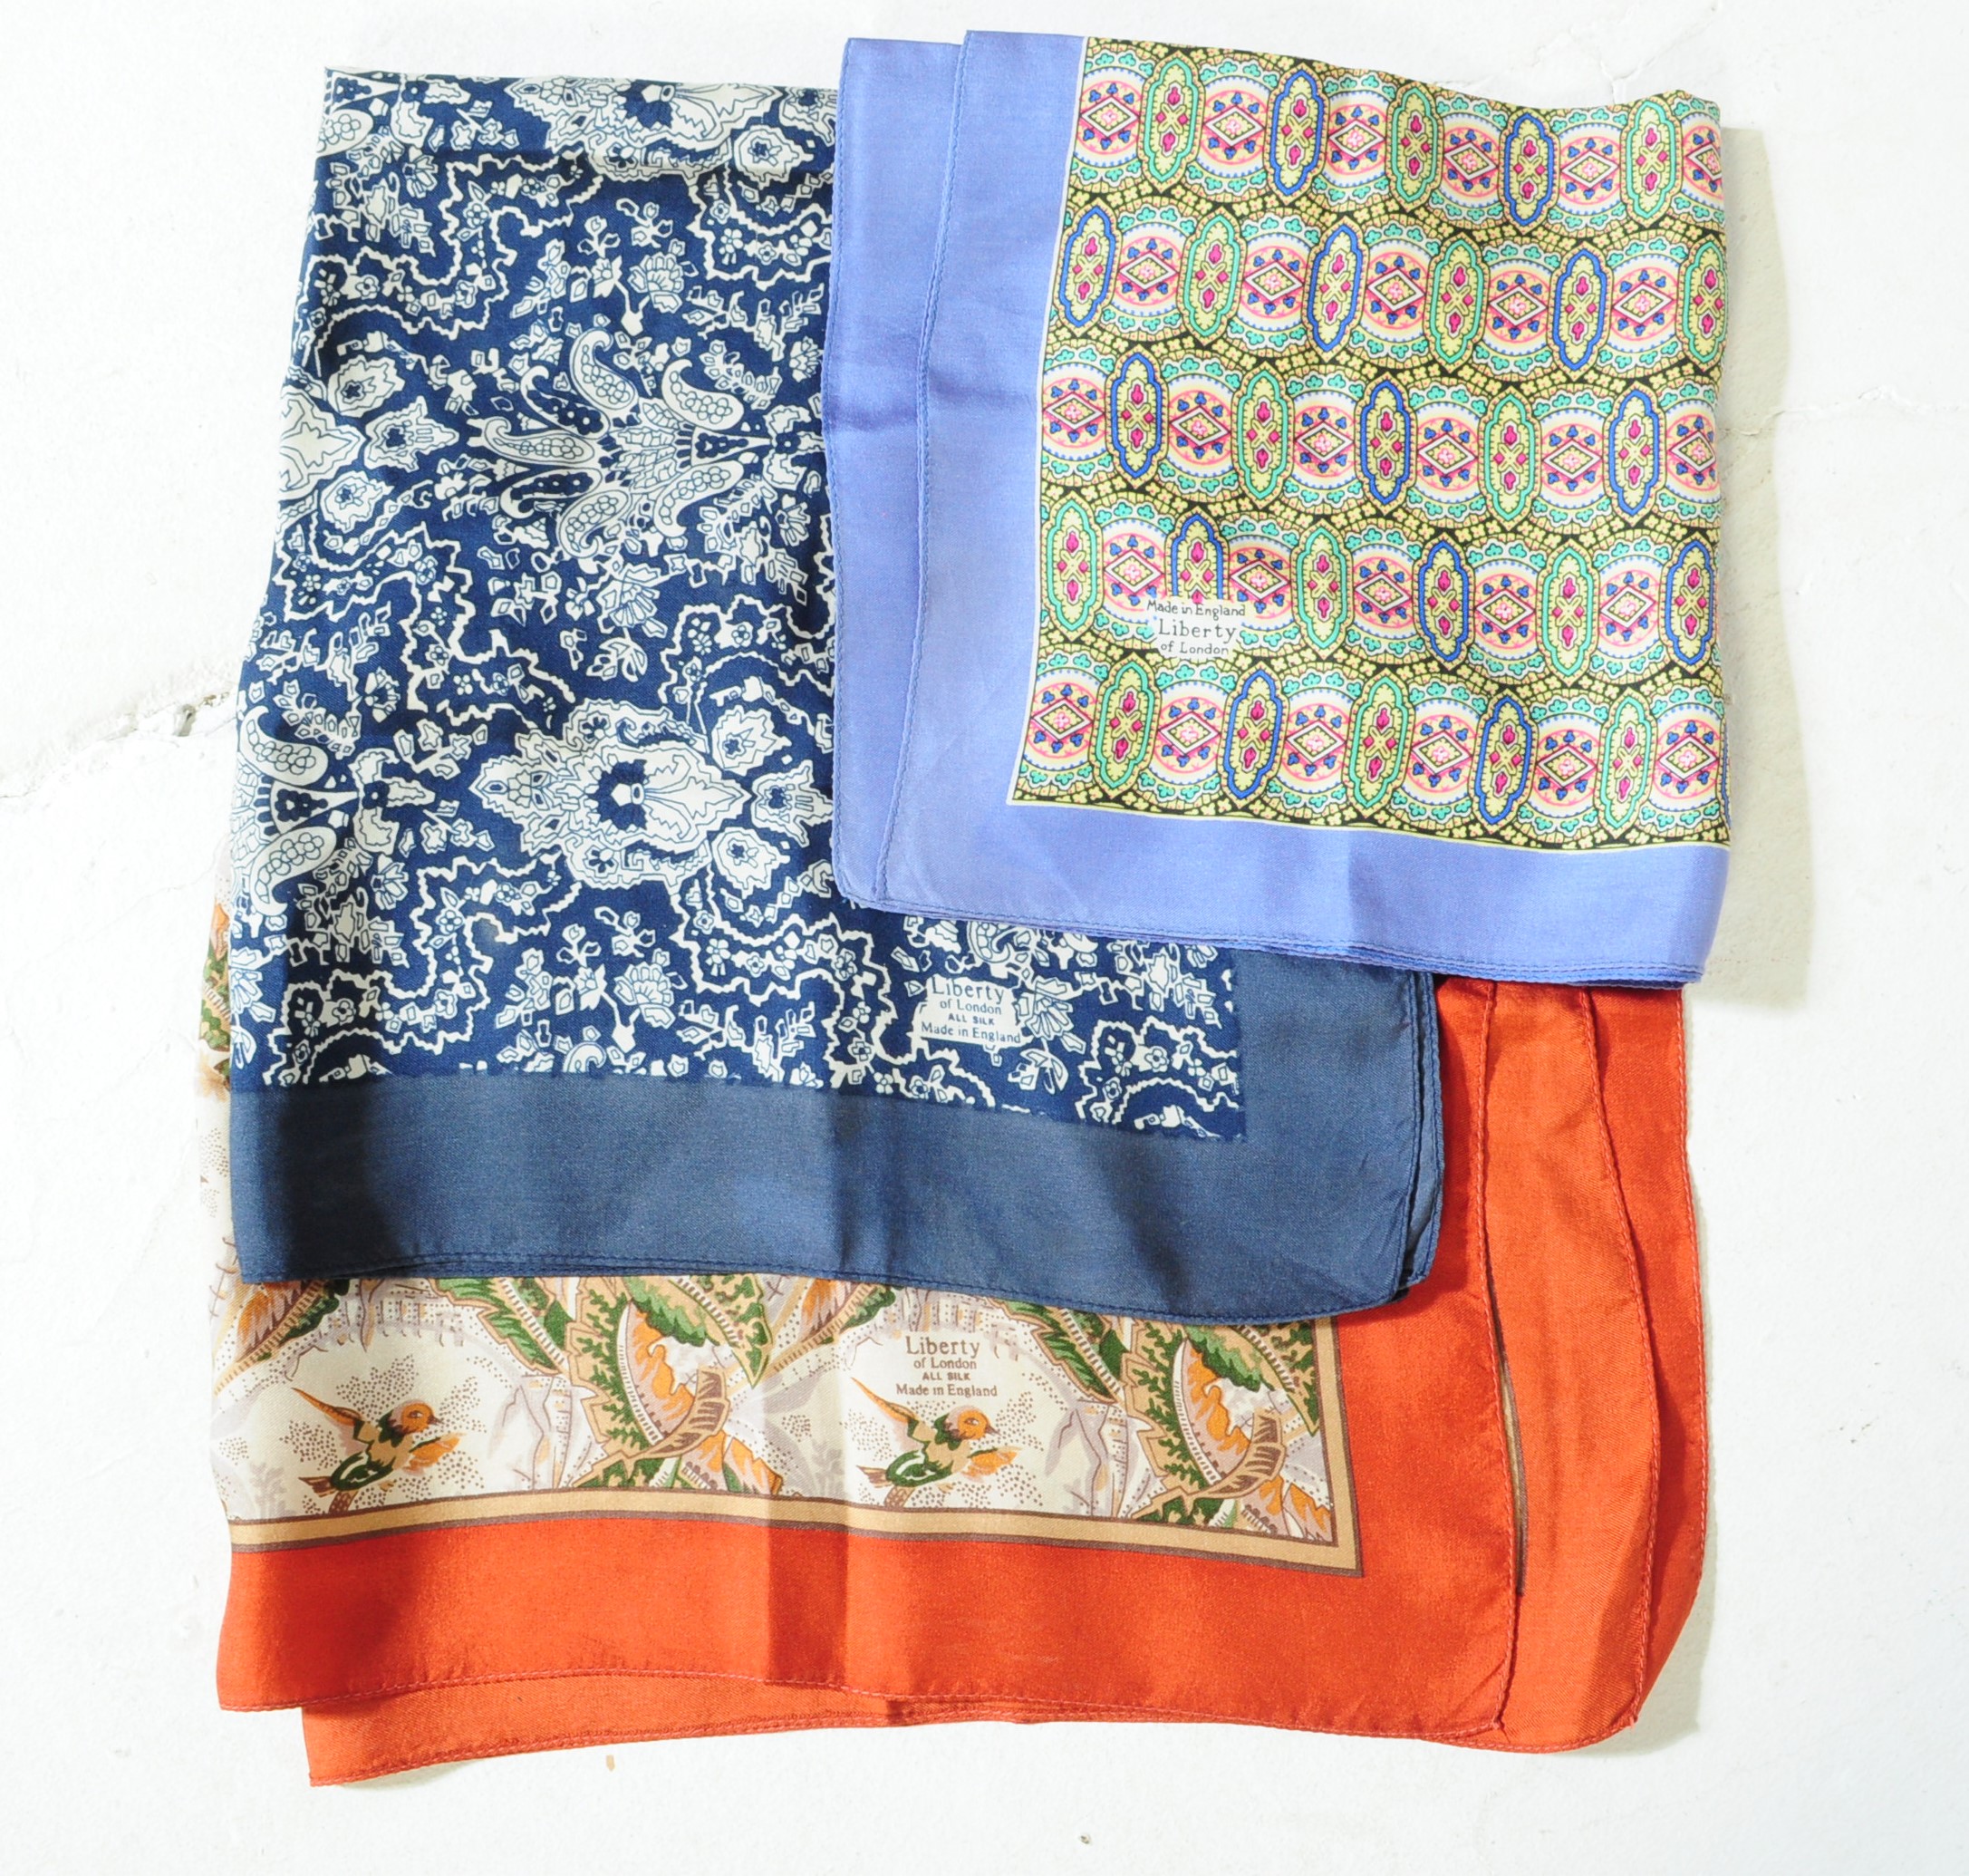 COLLECTION OF VINTAGE LIBERTY FABRIC & SCARVES - Image 2 of 6